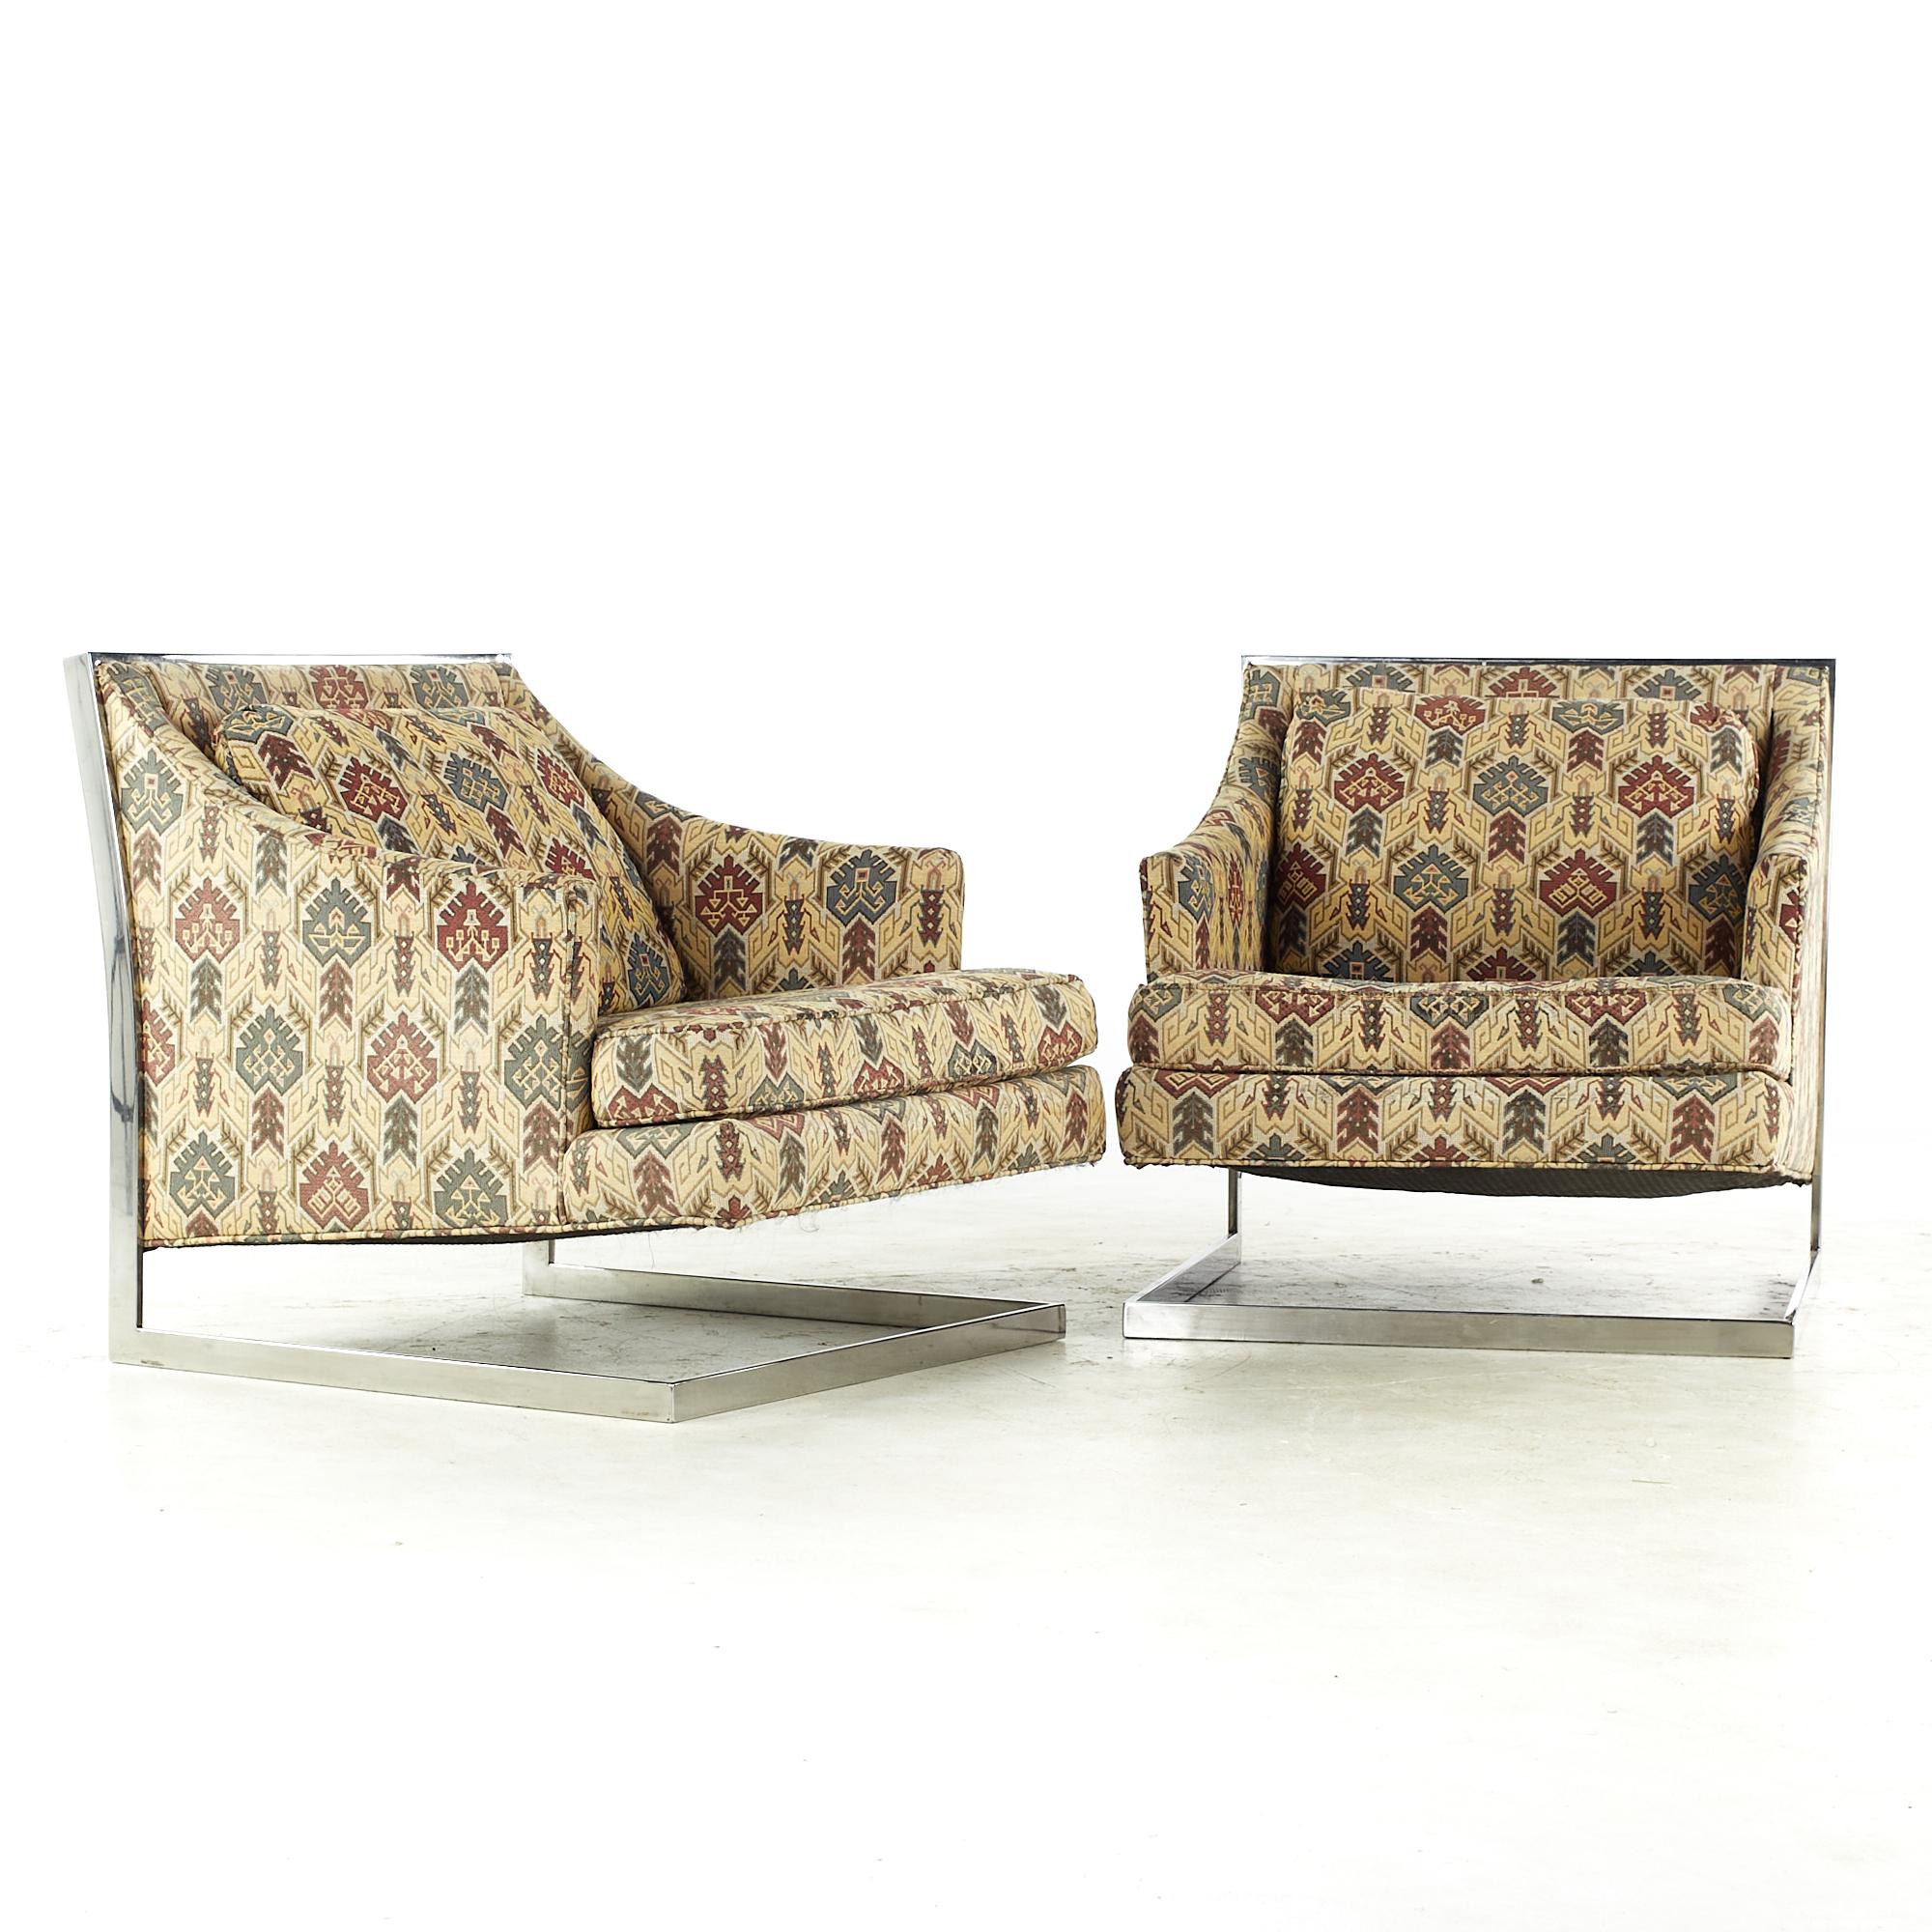 Milo Baughman style midcentury chrome cantilever lounge chairs - pair

Each chair measures: 27.5 wide x 32 deep x 28.25 high, with a seat height of 15 and arm height/chair clearance 20 inches

All pieces of furniture can be had in what we call